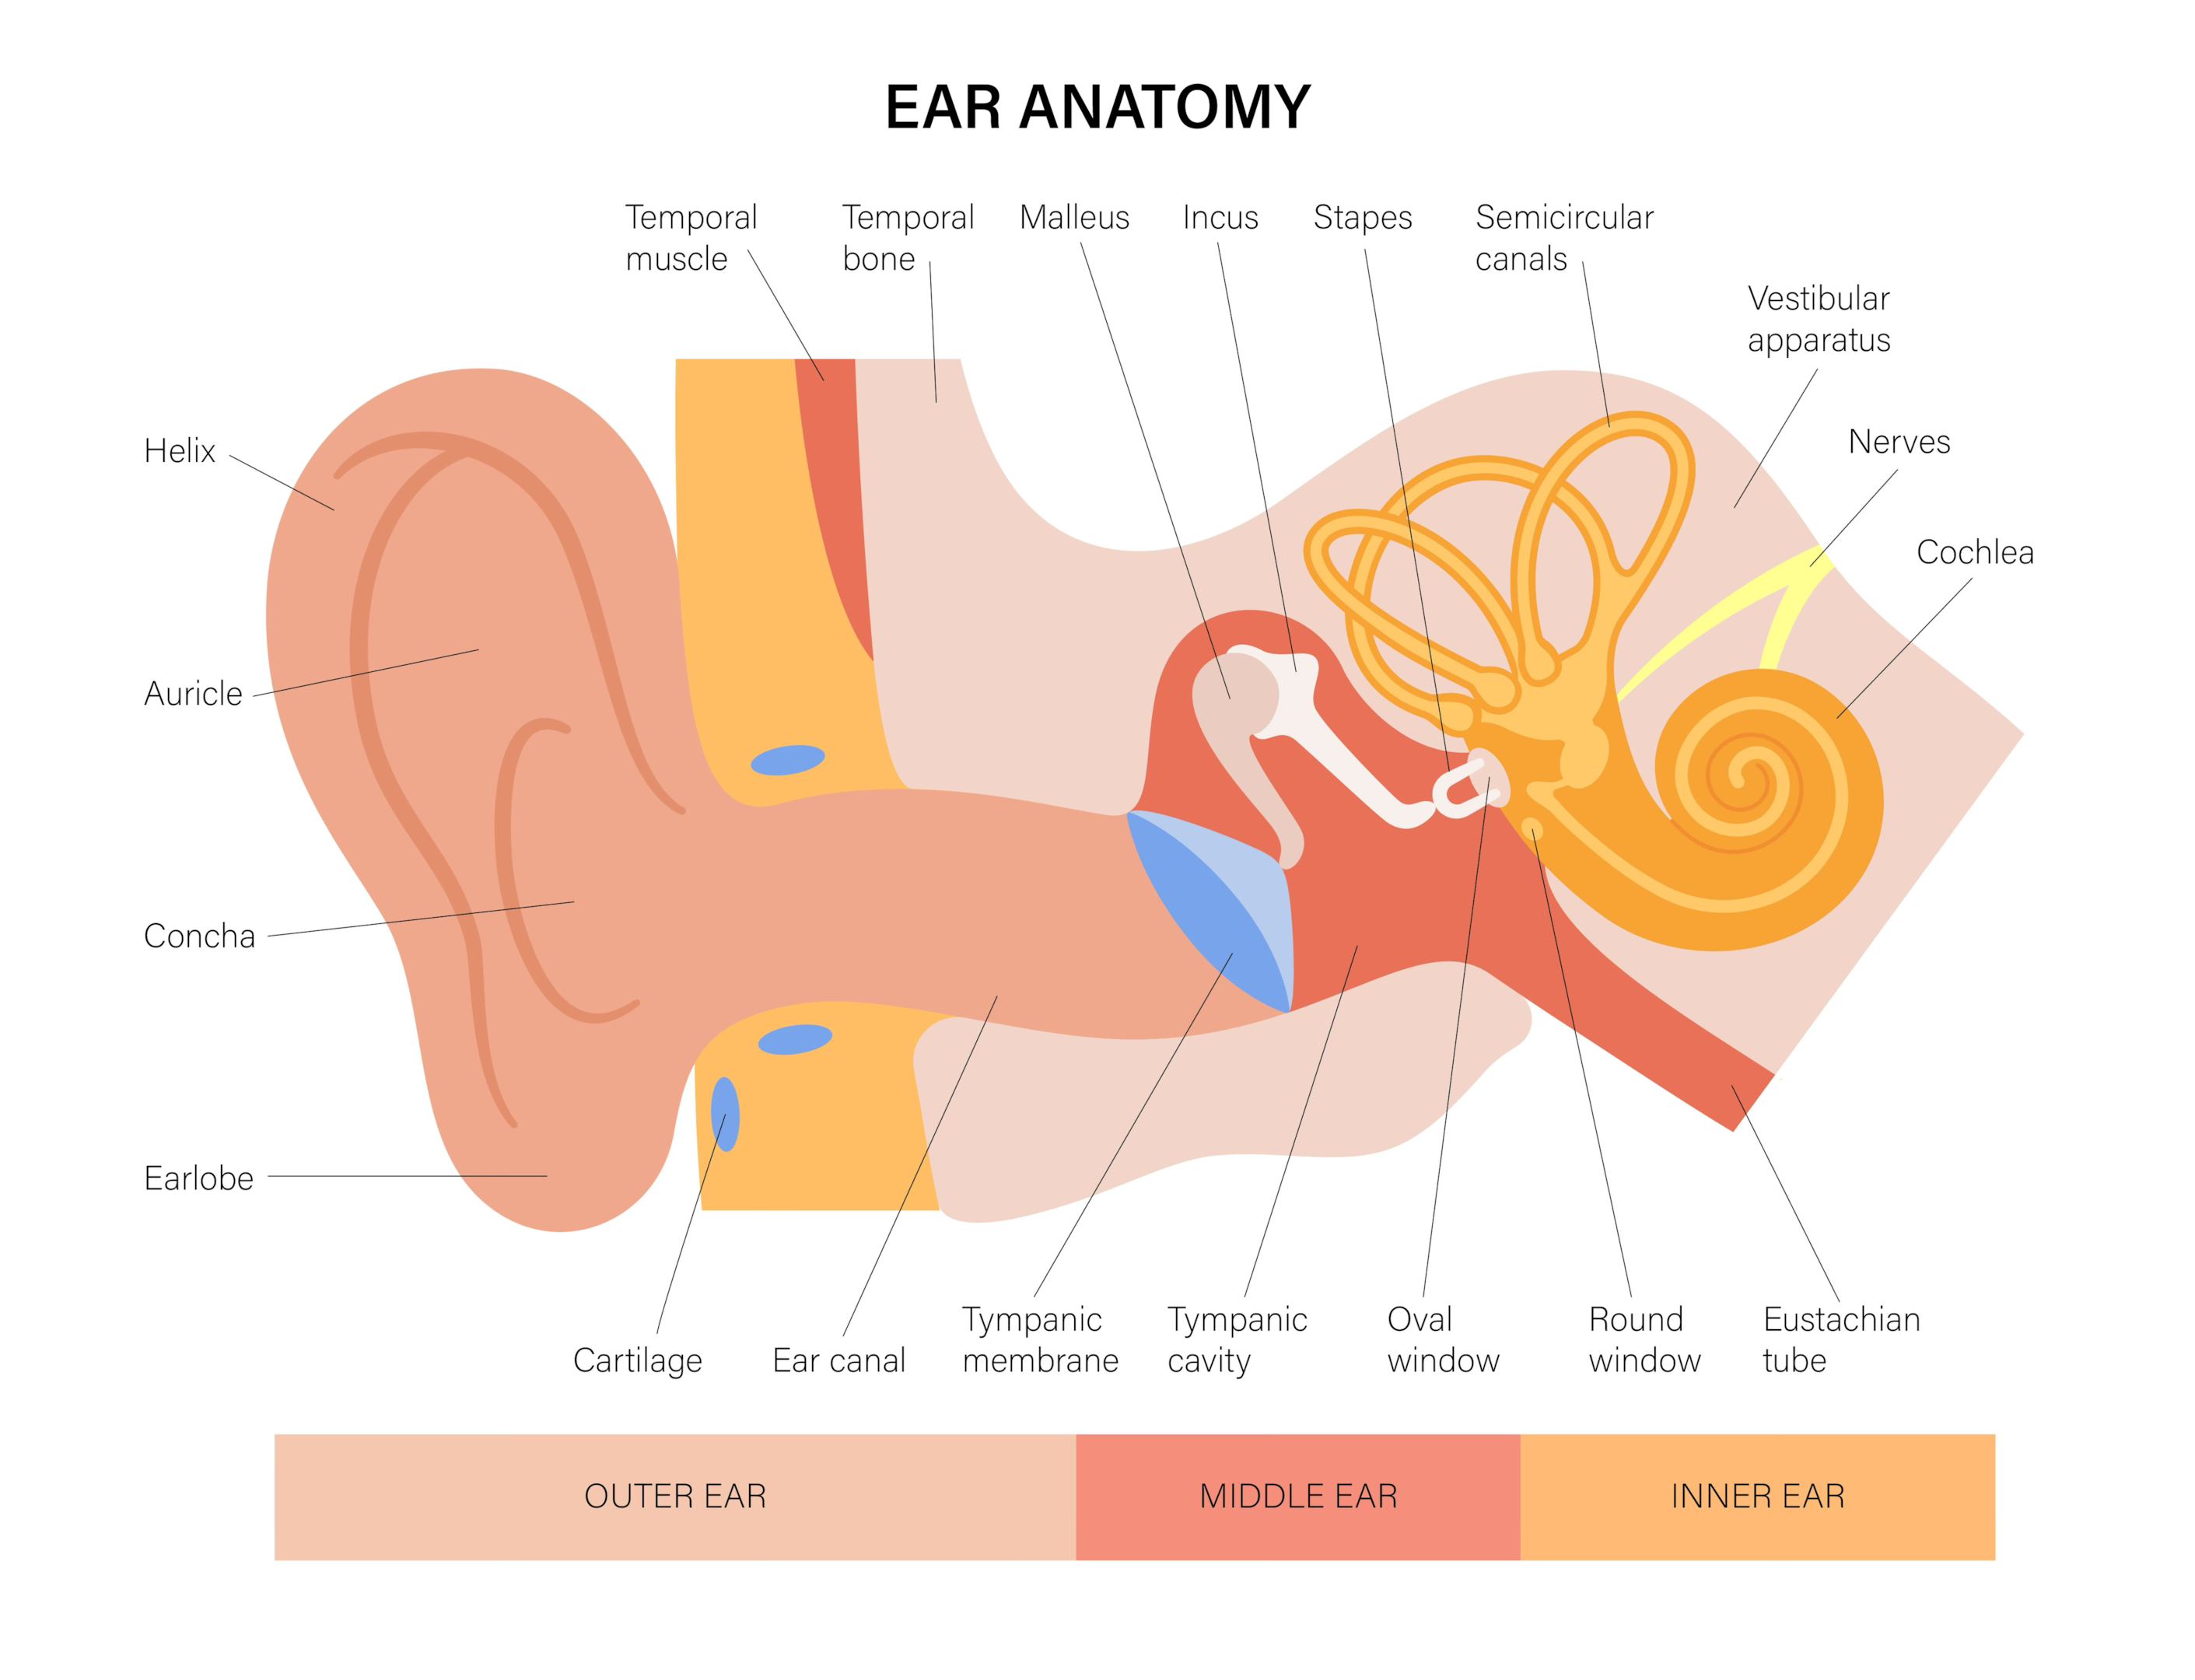 How to Drain Fluid From the Middle Ear at Home: 5 Tips